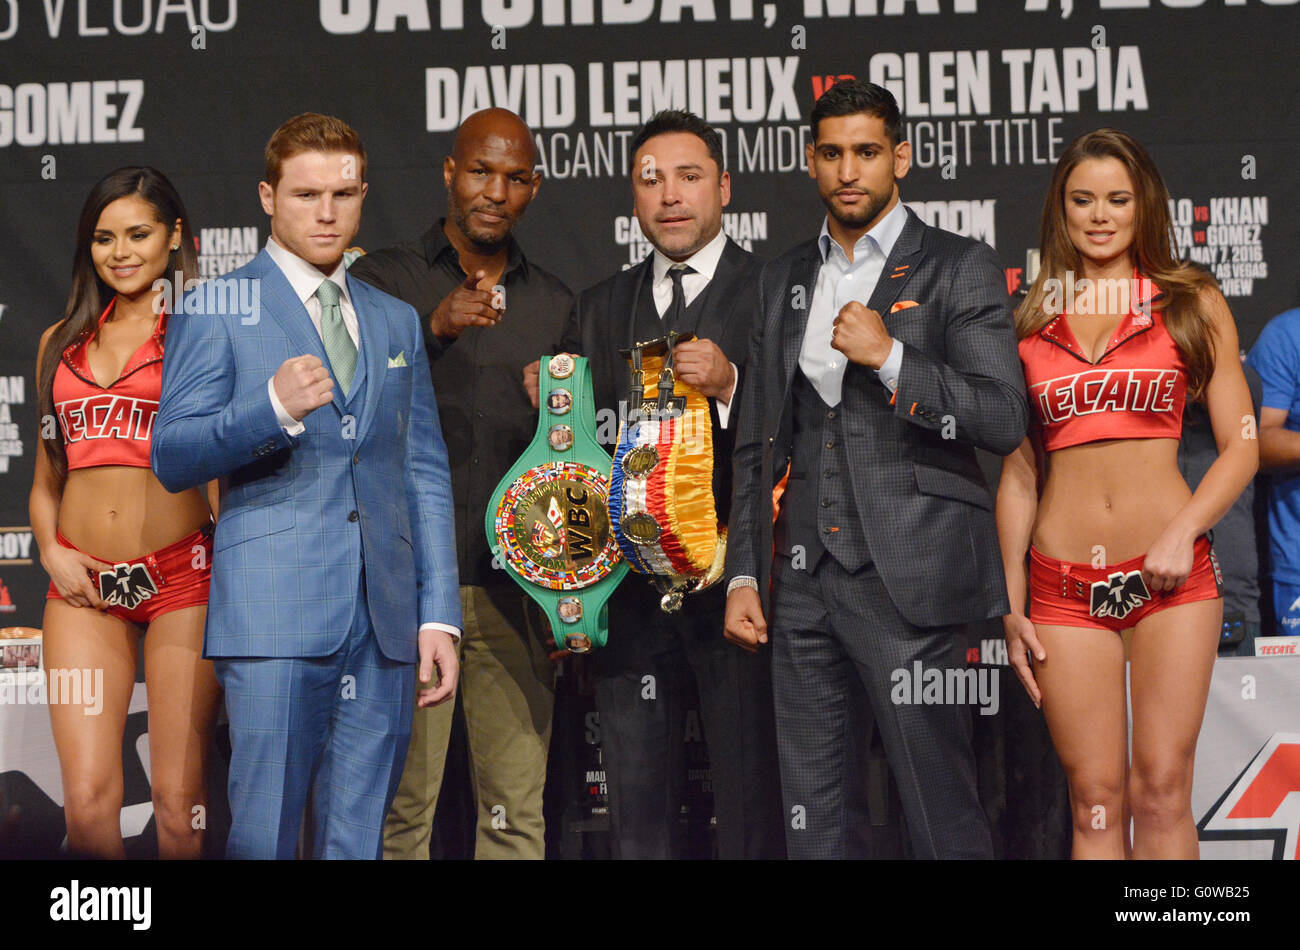 Las Vegas, Nevada, USA. 4th May, 2016. Boxer Canelo Alvarez, Golden Boys Promotions Executives Bernard Hopkins and Oscar De La Hoya and boxer Amir Khan attend the final press conference for the Middleweight Weight Championship fight at The Ka Theater inside MGM Grand Hotel & Casino on May 4, 2016, in Las Vegas, Nevada. Credit:  Marcel Thomas/ZUMA Wire/Alamy Live News Stock Photo